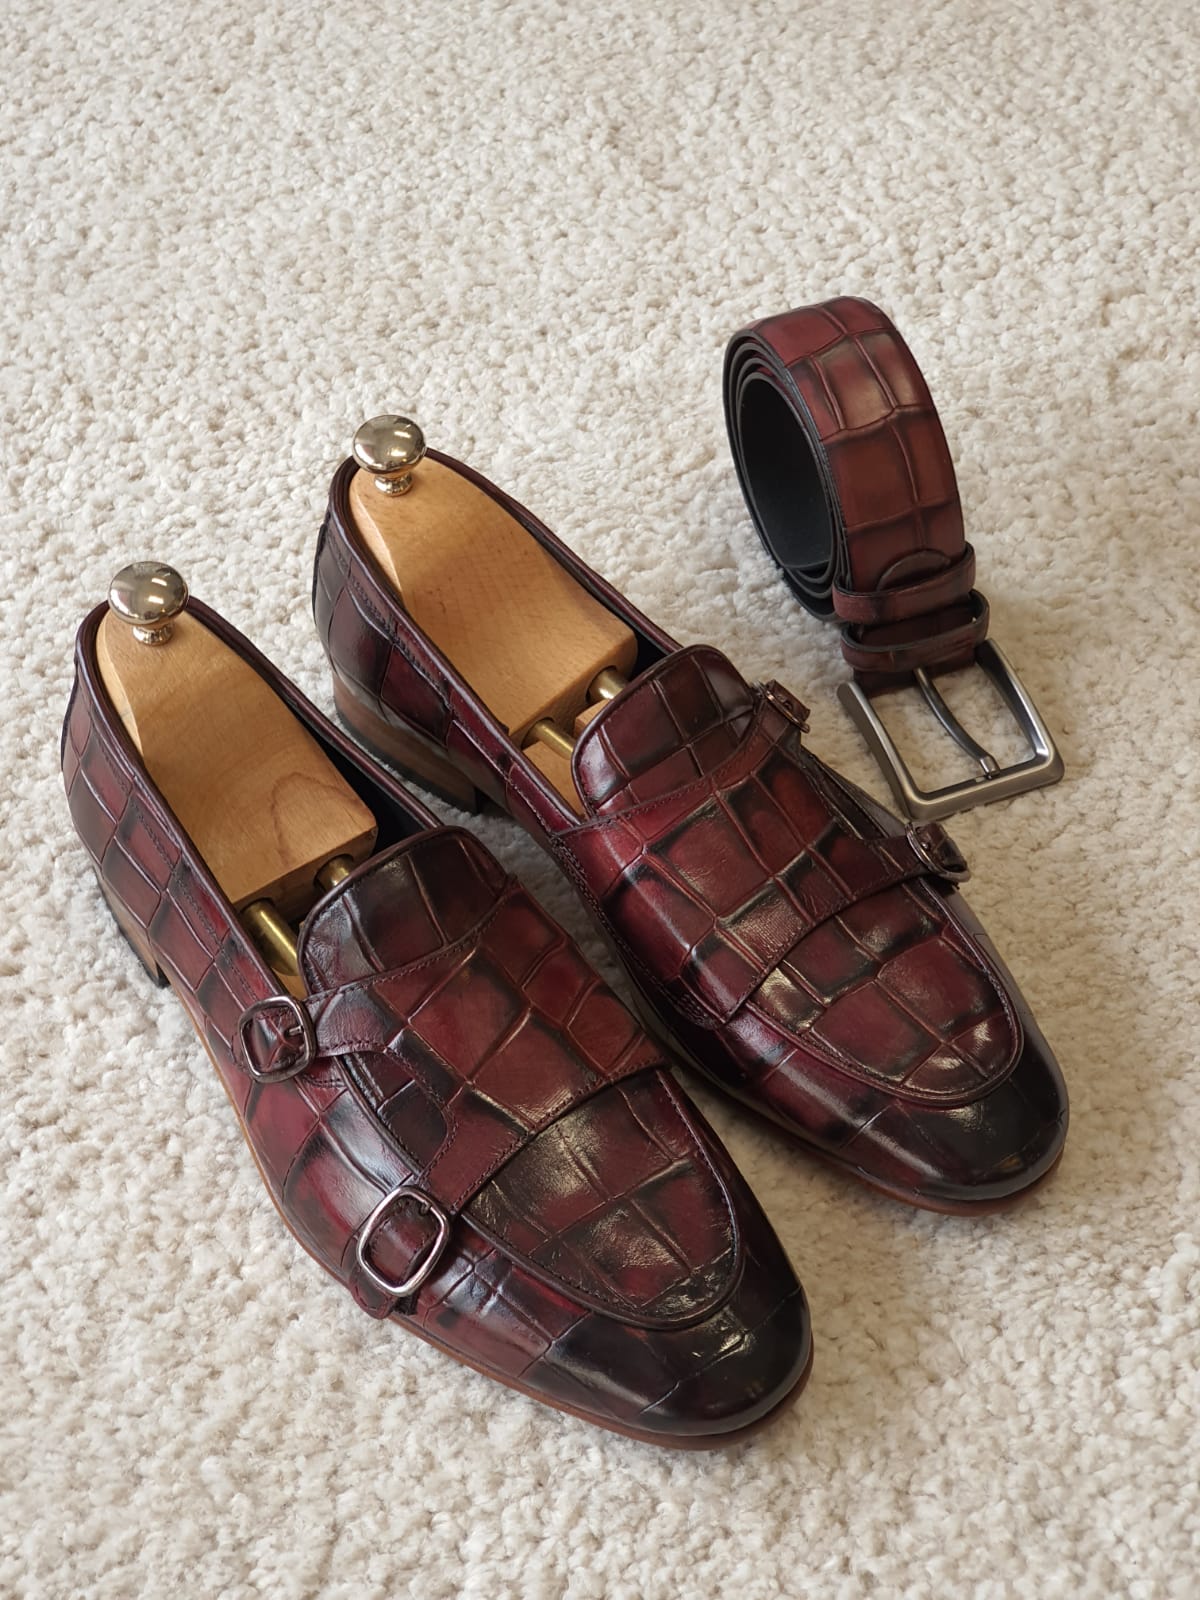 LV. textured penny loafers